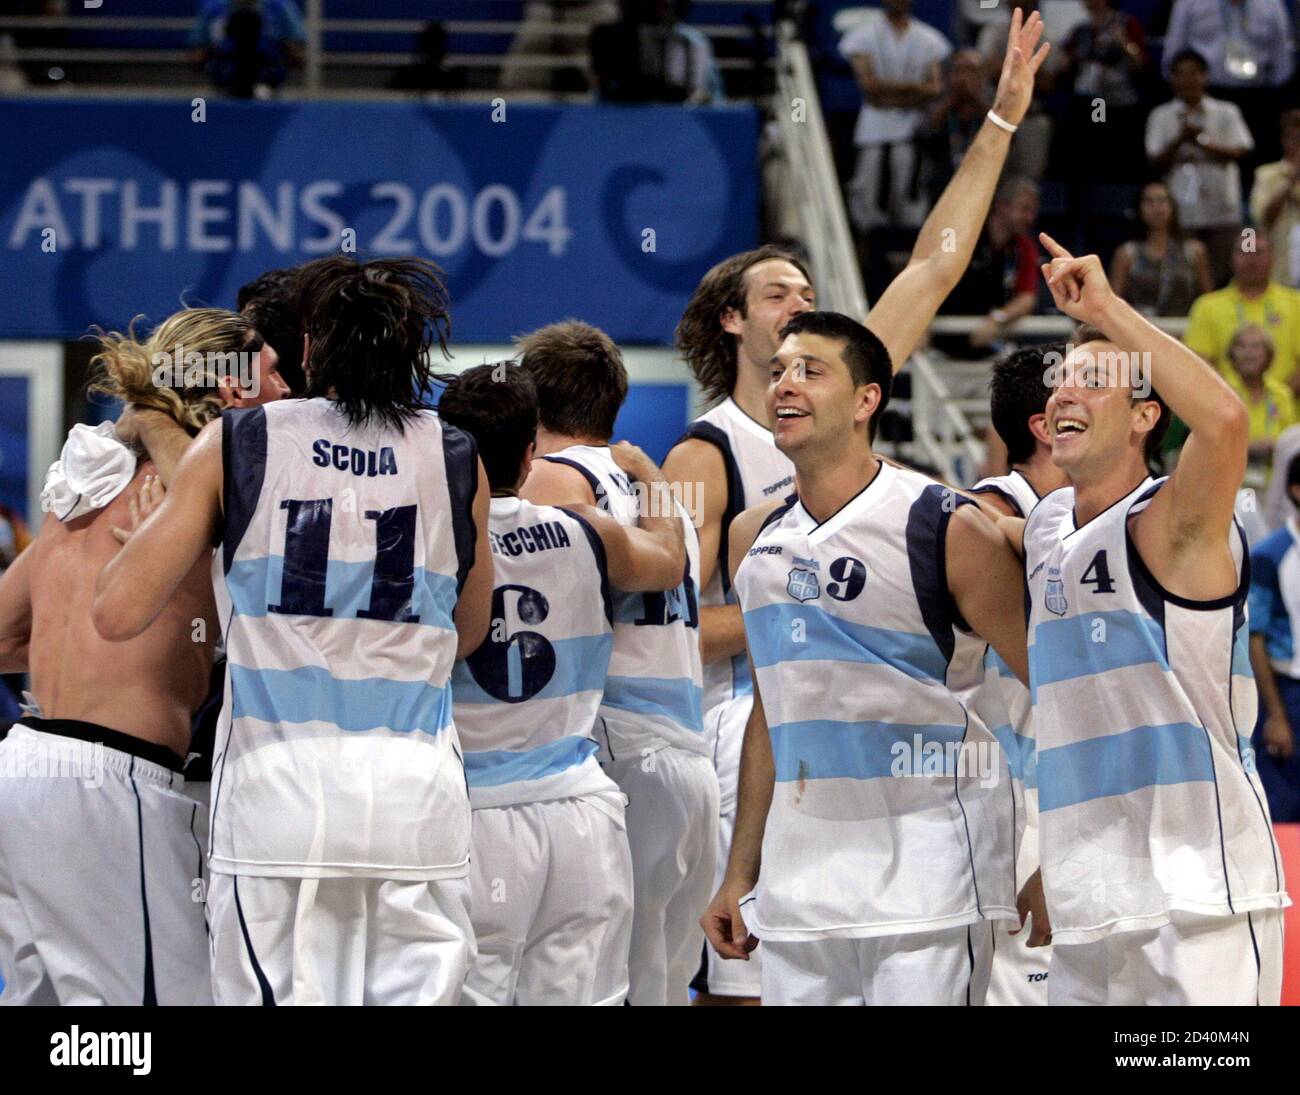 Argentina basketball players Gabriel Fernandez (R) and Juan Ignacio Sanchez  (2ndR) celebrate with team mates after defeating the U.S. in their men's  basketball semi-final match at the Athens 2004 Olympic Games, August